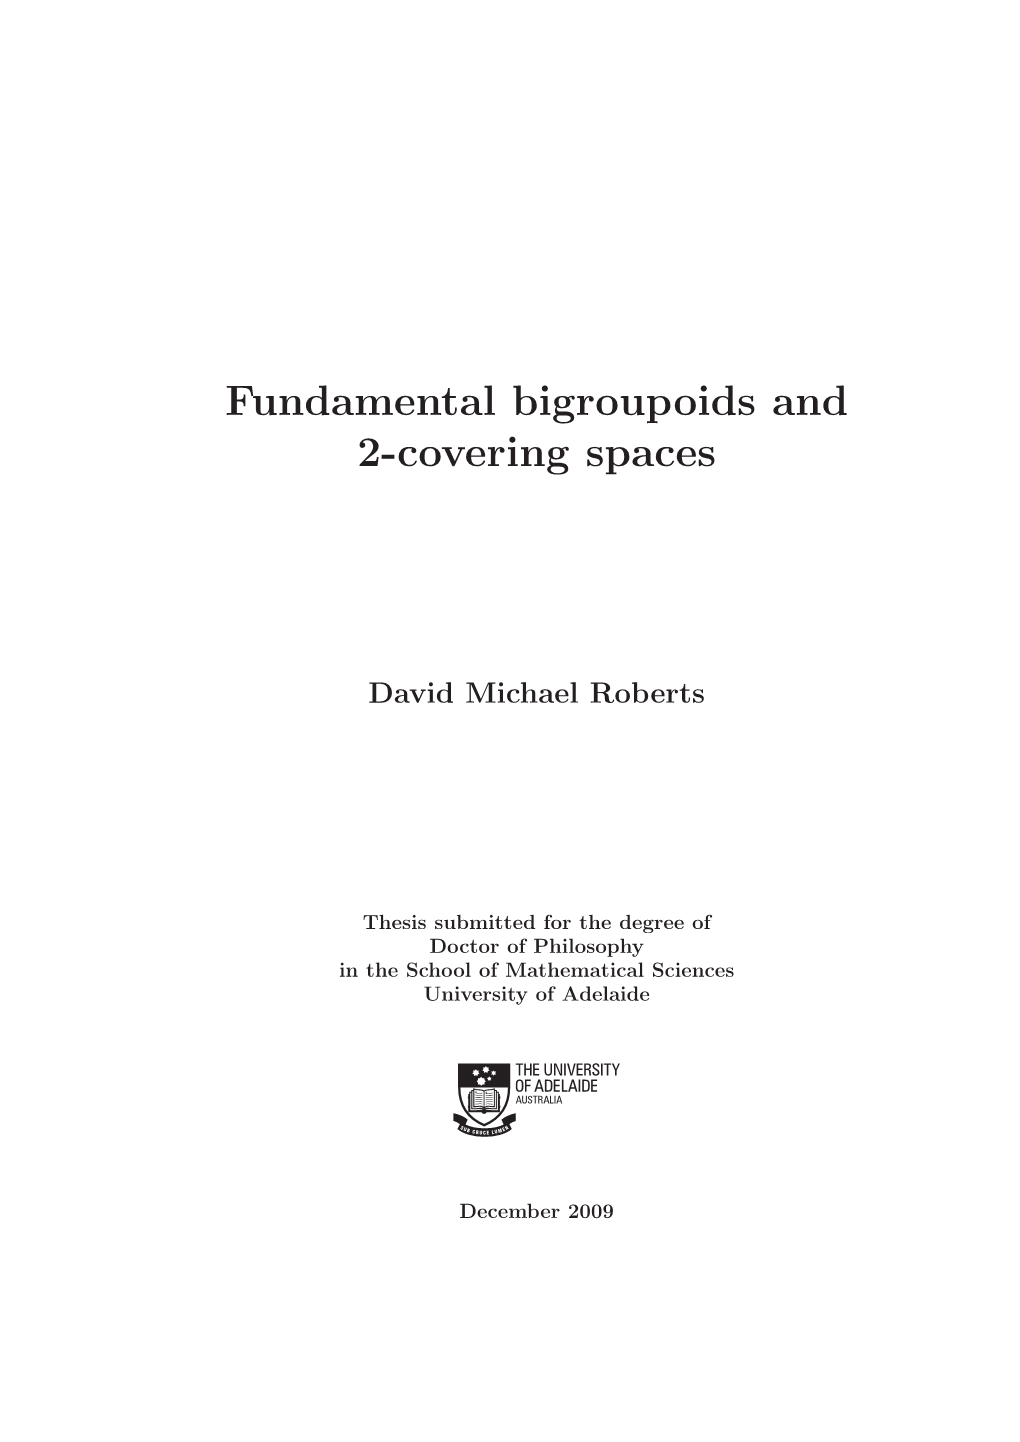 Fundamental Bigroupoids and 2-Covering Spaces